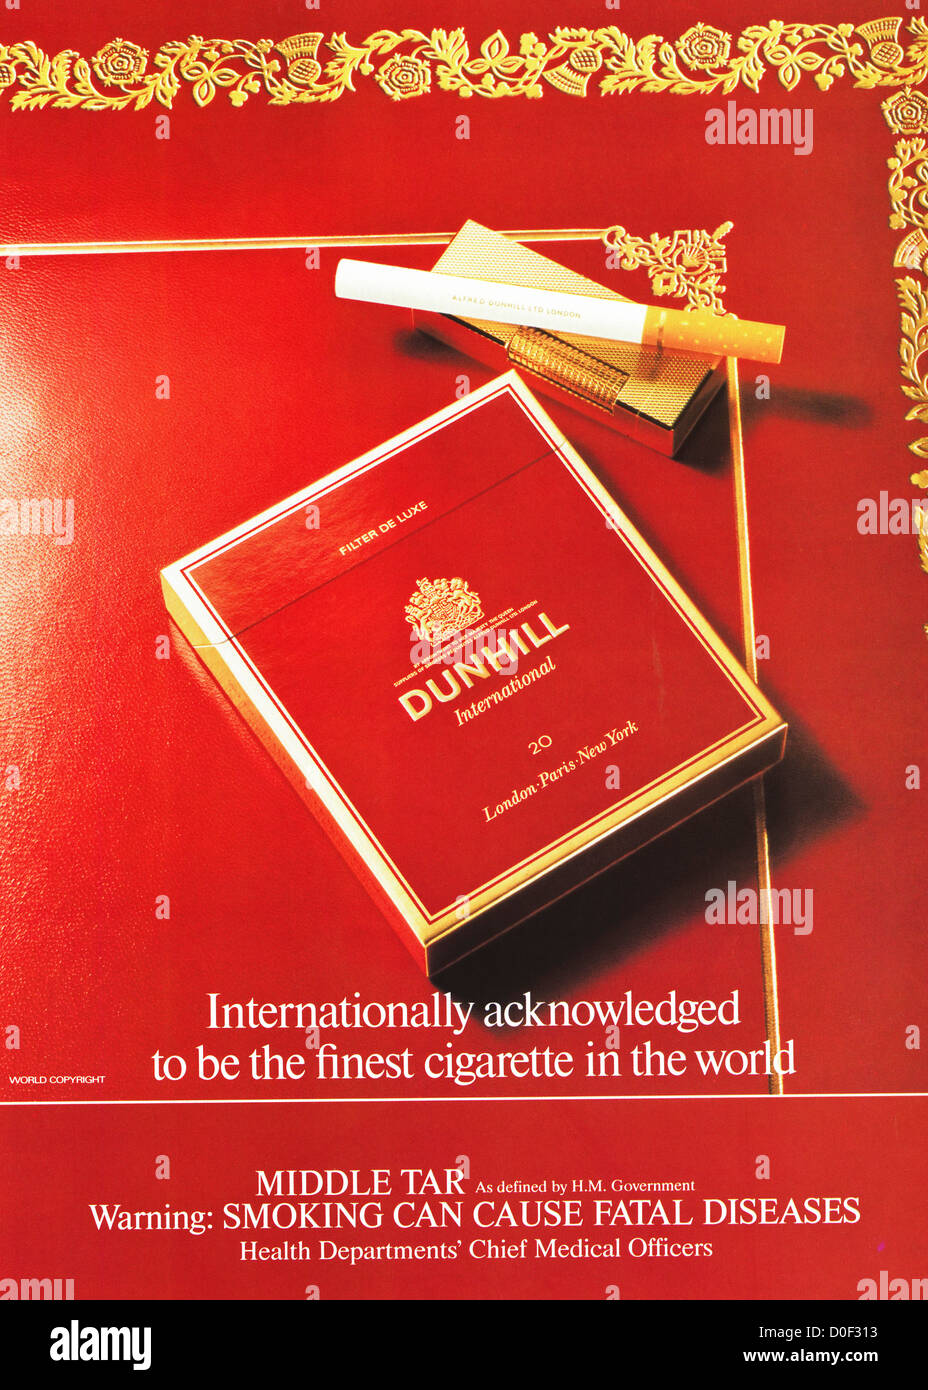 Original 1980s print advertisement from English consumer magazine advertising Dunhill cigarettes with health warning Stock Photo